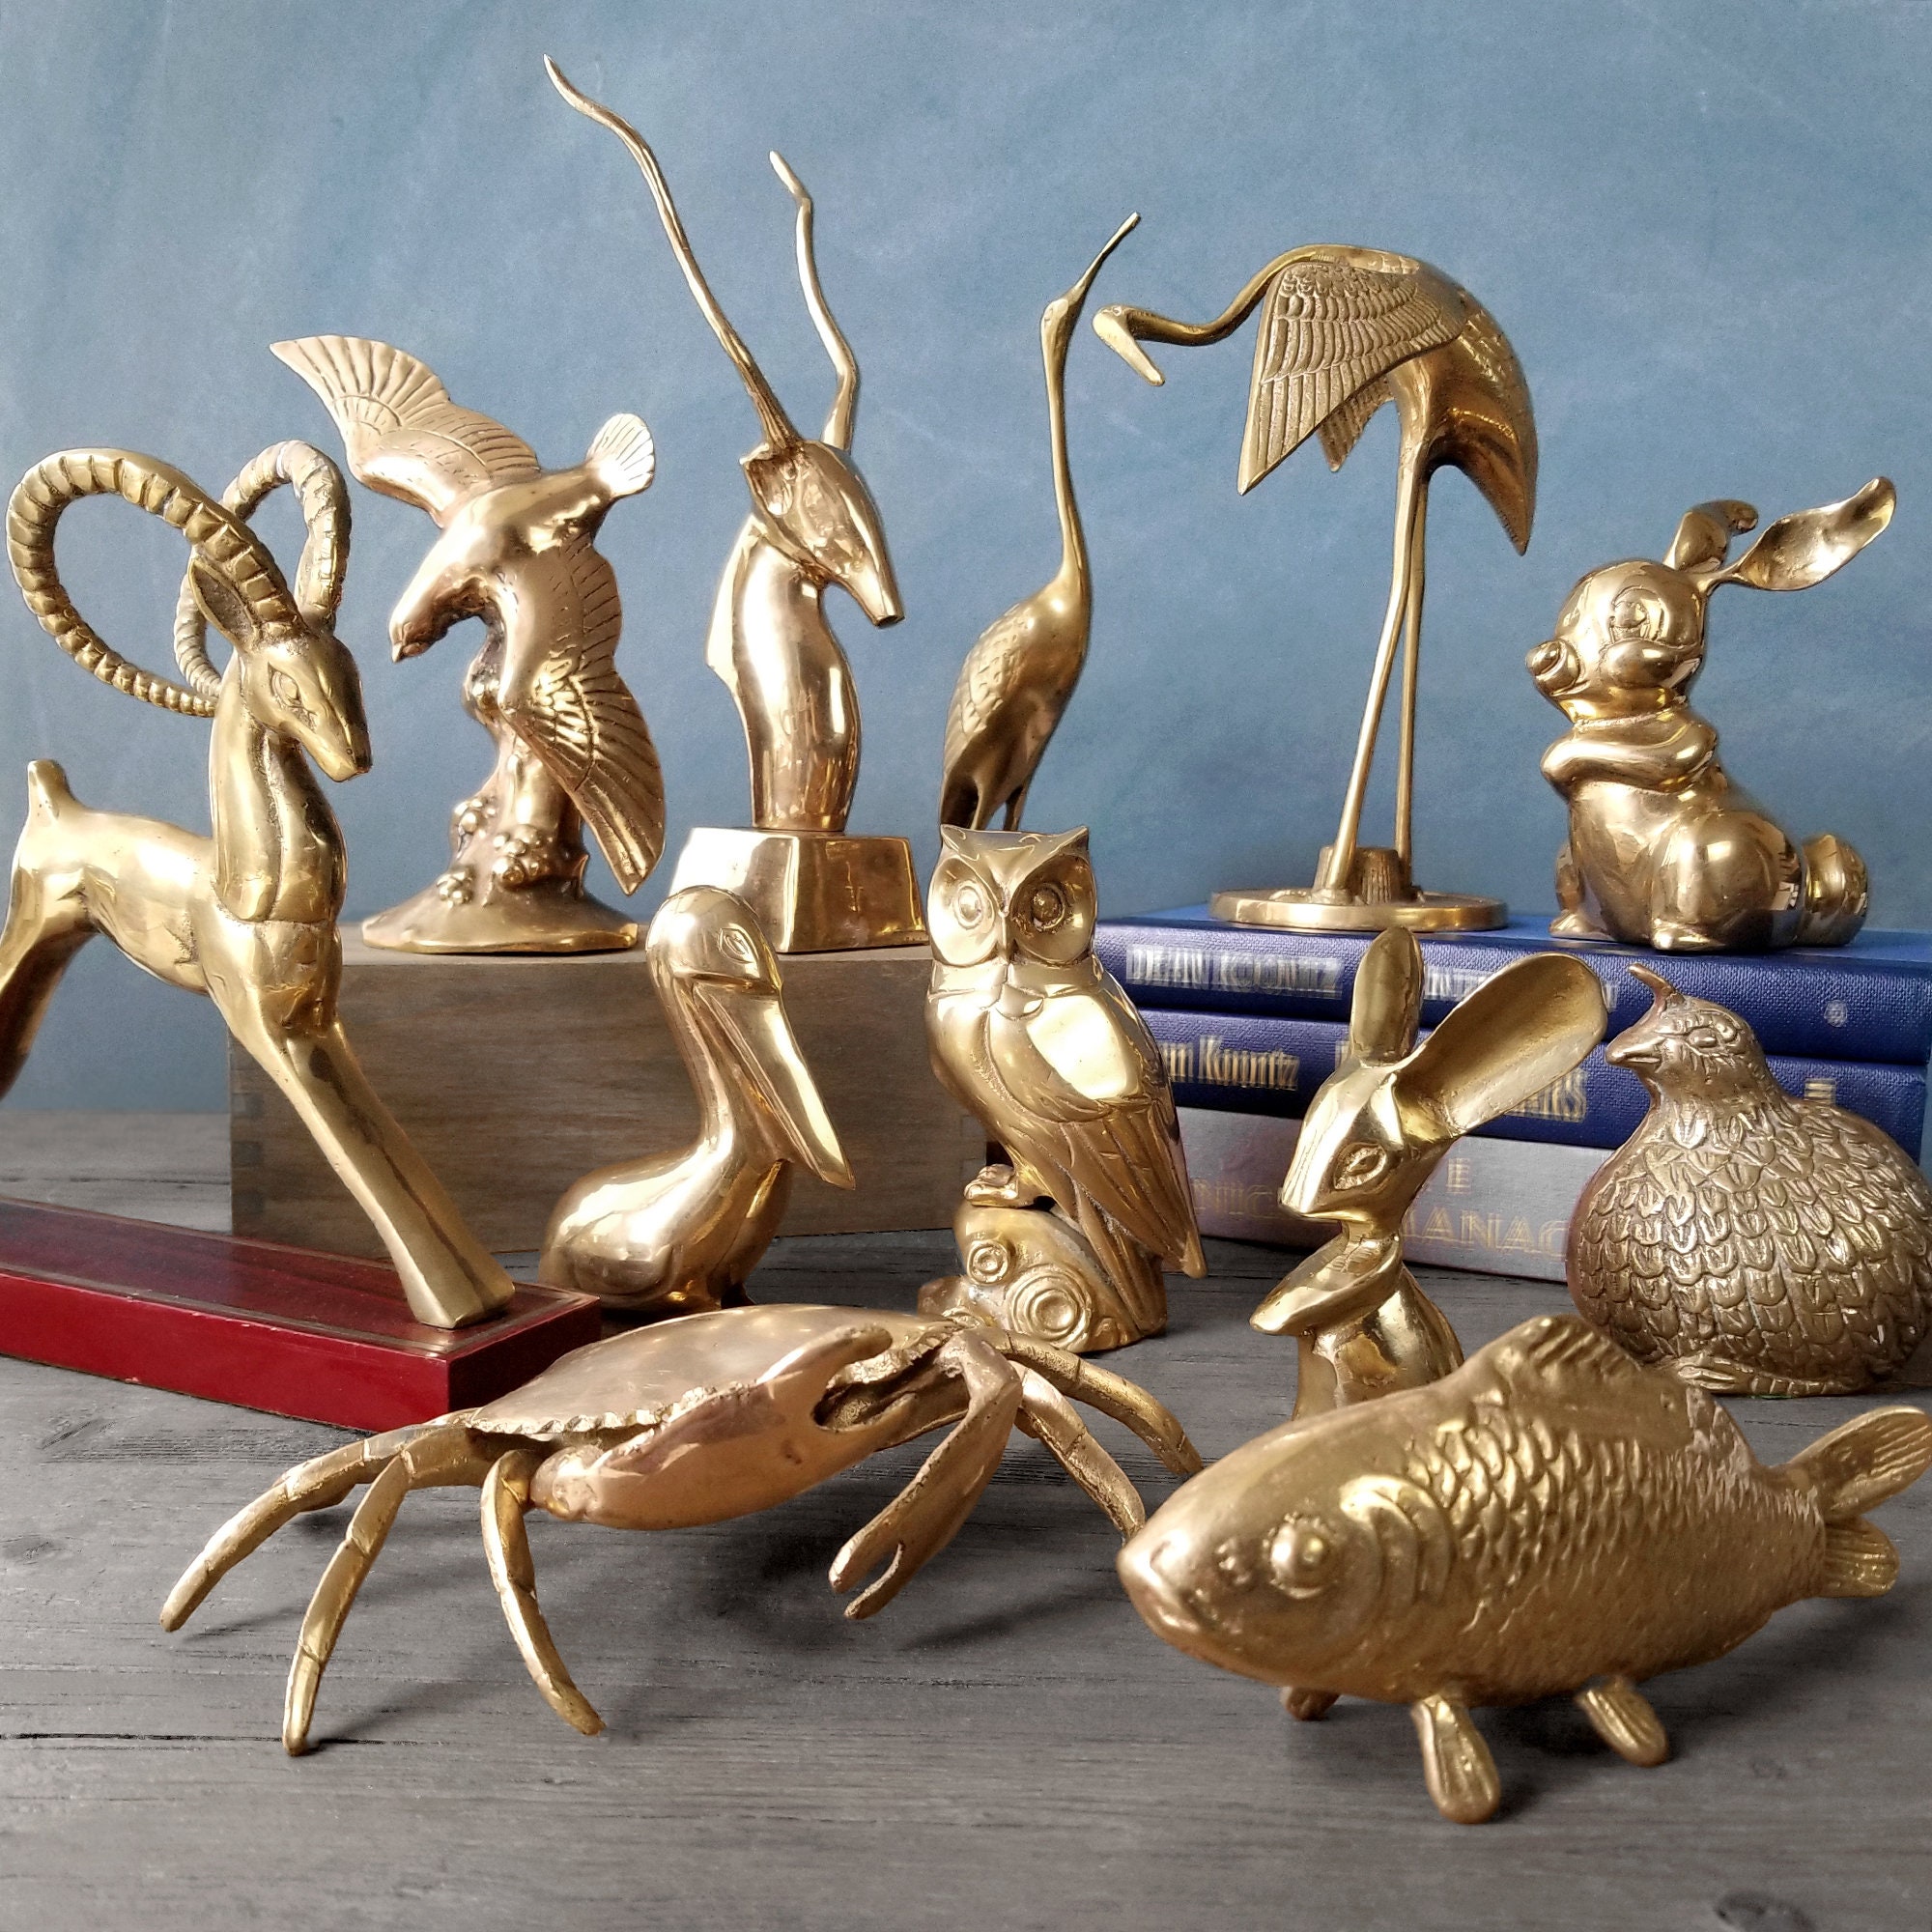 Assorted Brass Animal Figurines med/lg Crab Box, Crane, Fish, Bunny Rabbit,  Quail, Owl, Pelican, & More Sold Separately 